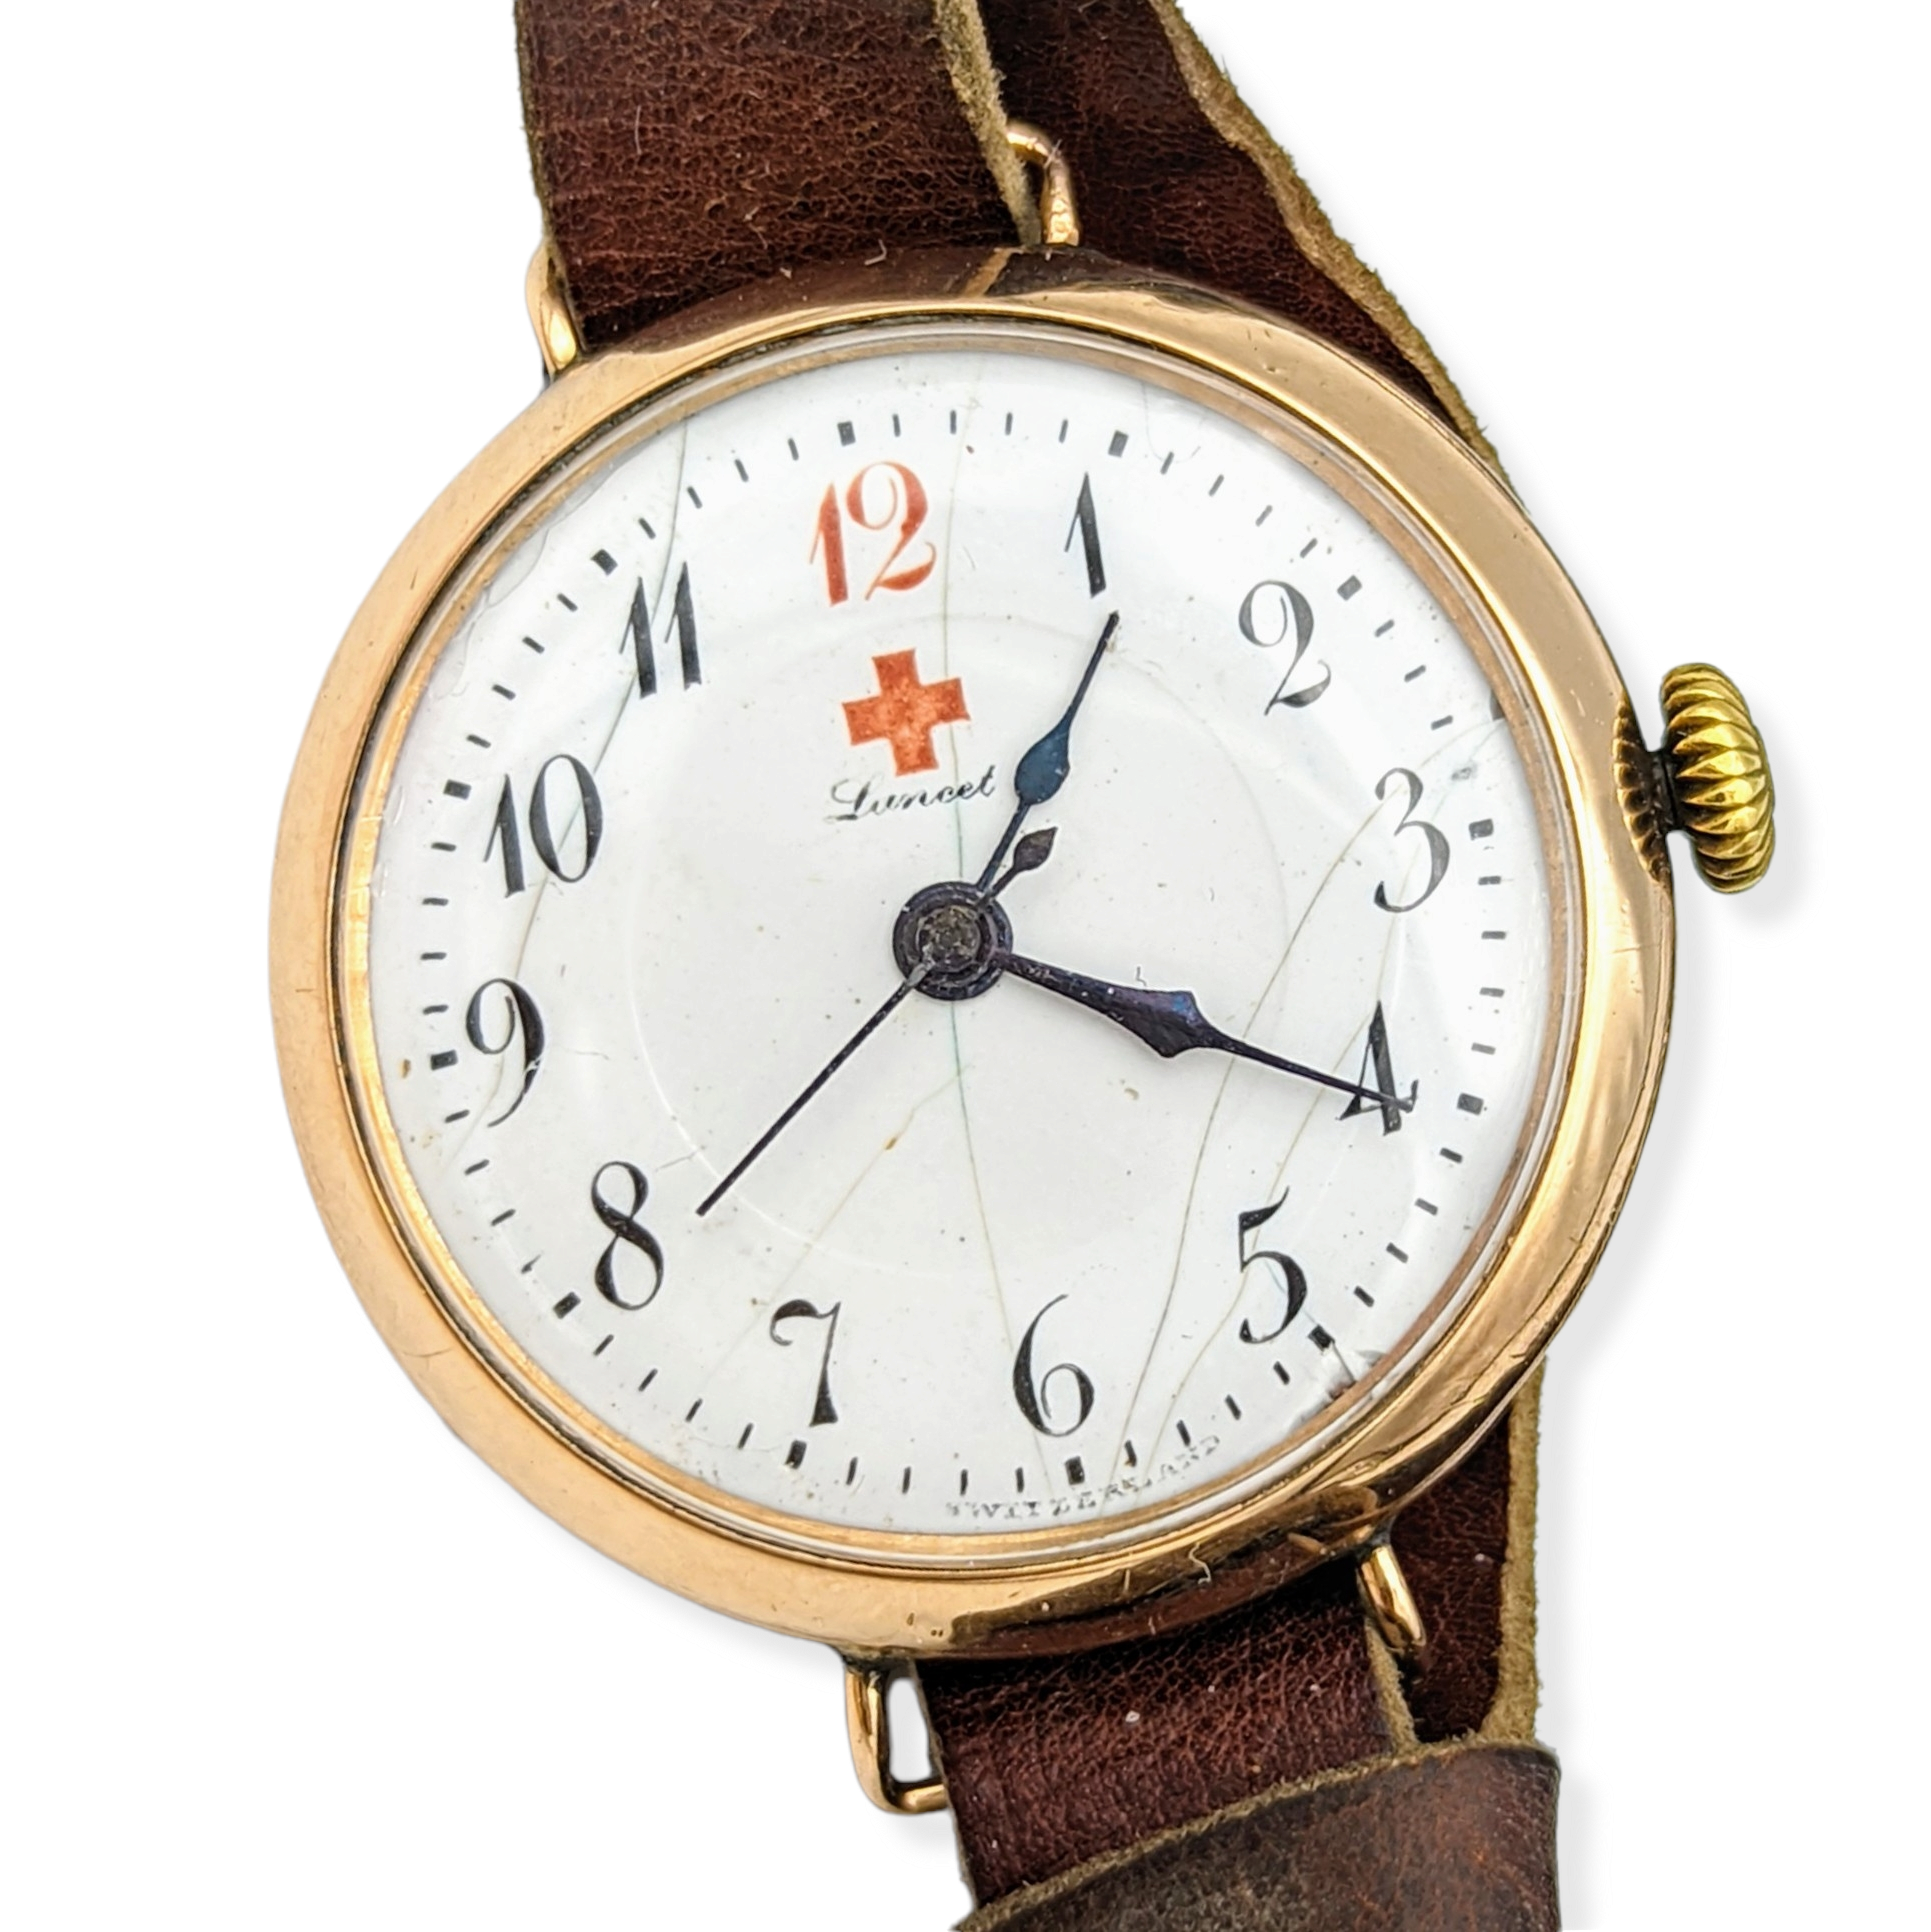 Lancet Red Cross Medical Wristwatch - WWI Trench Watch - REBBERG Movement 7 Jewels